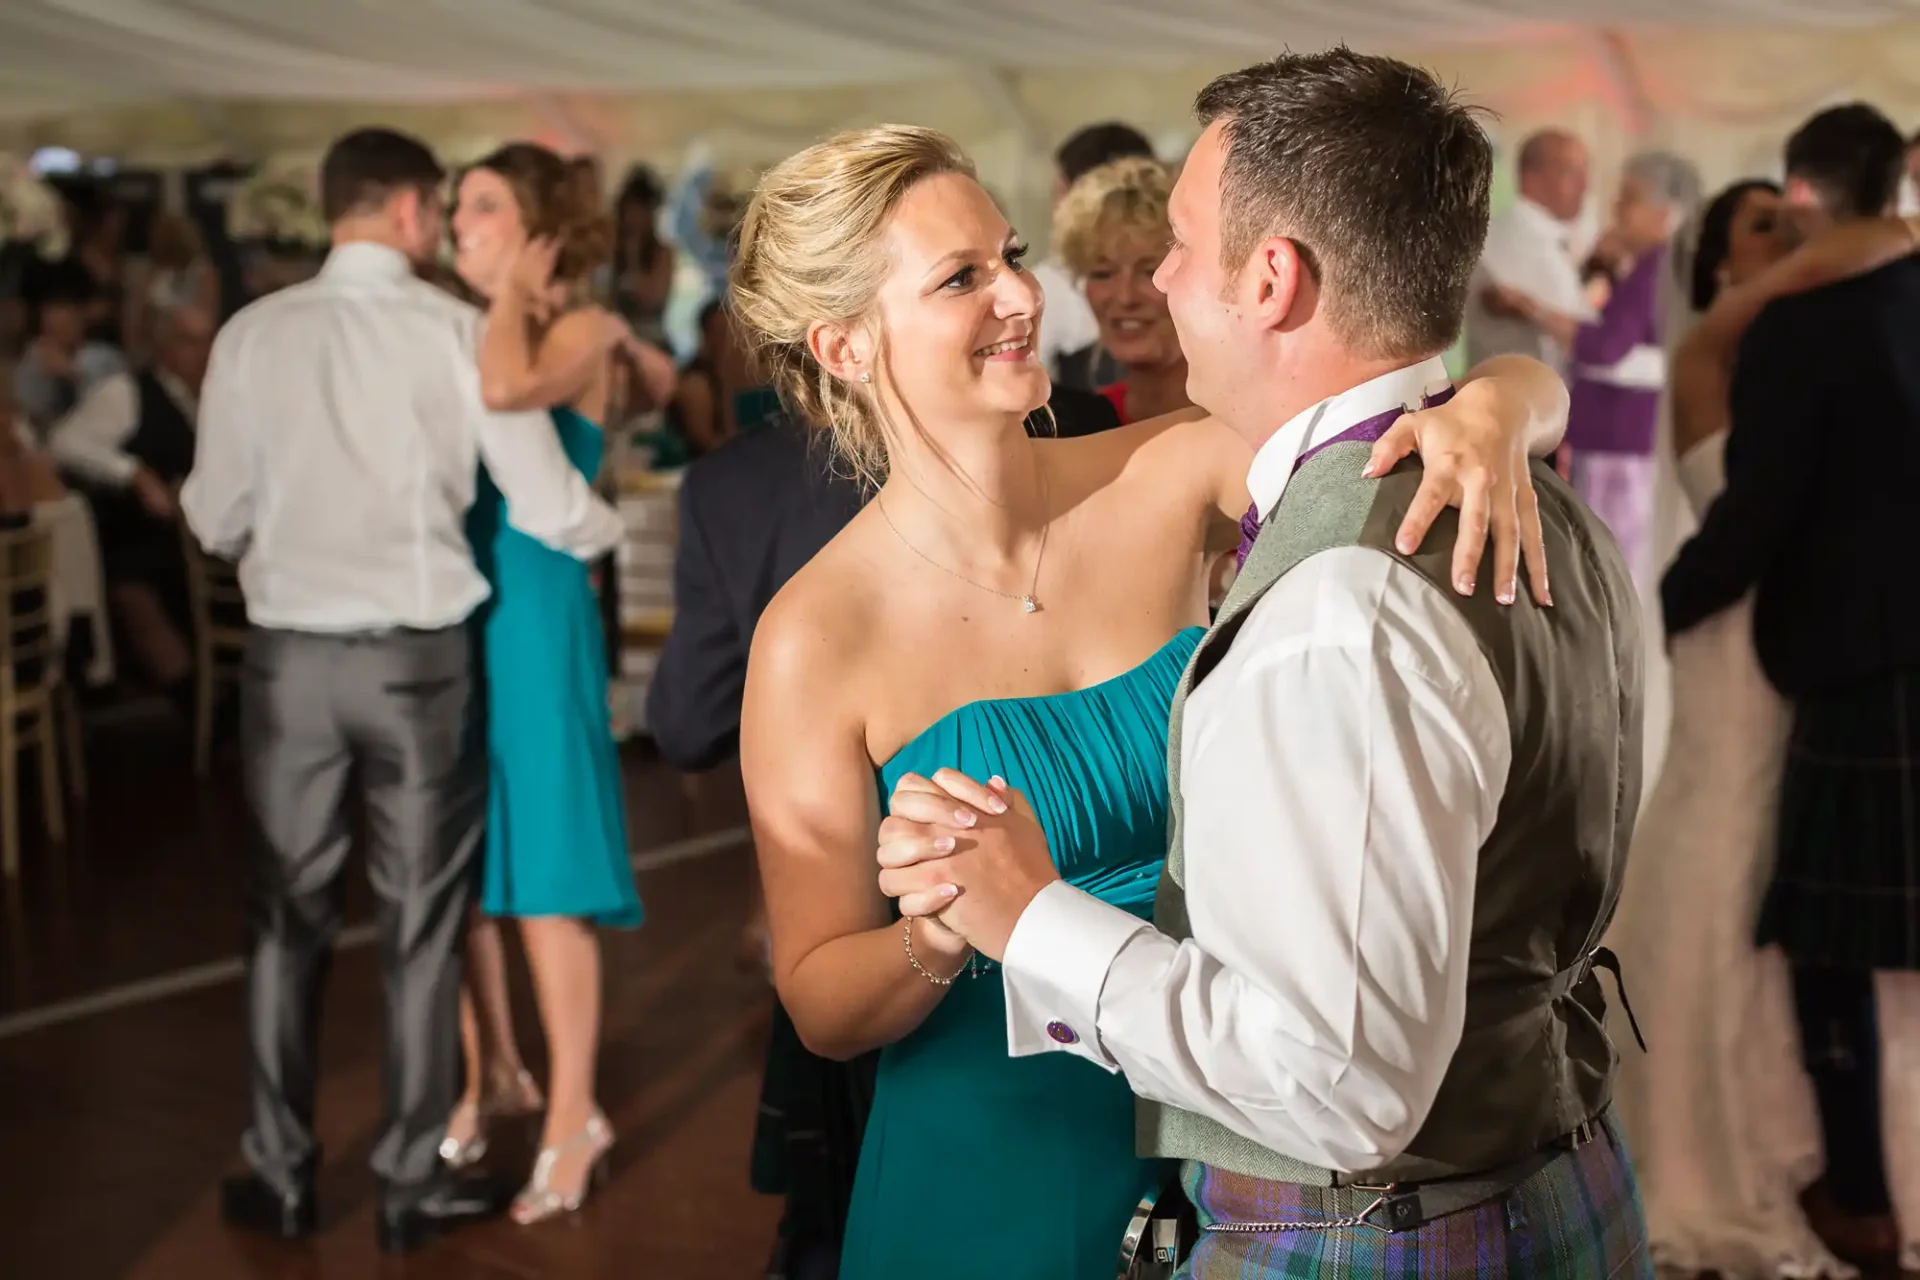 A couple dances closely, smiling at each other, at a wedding reception inside a tent filled with dancing guests.